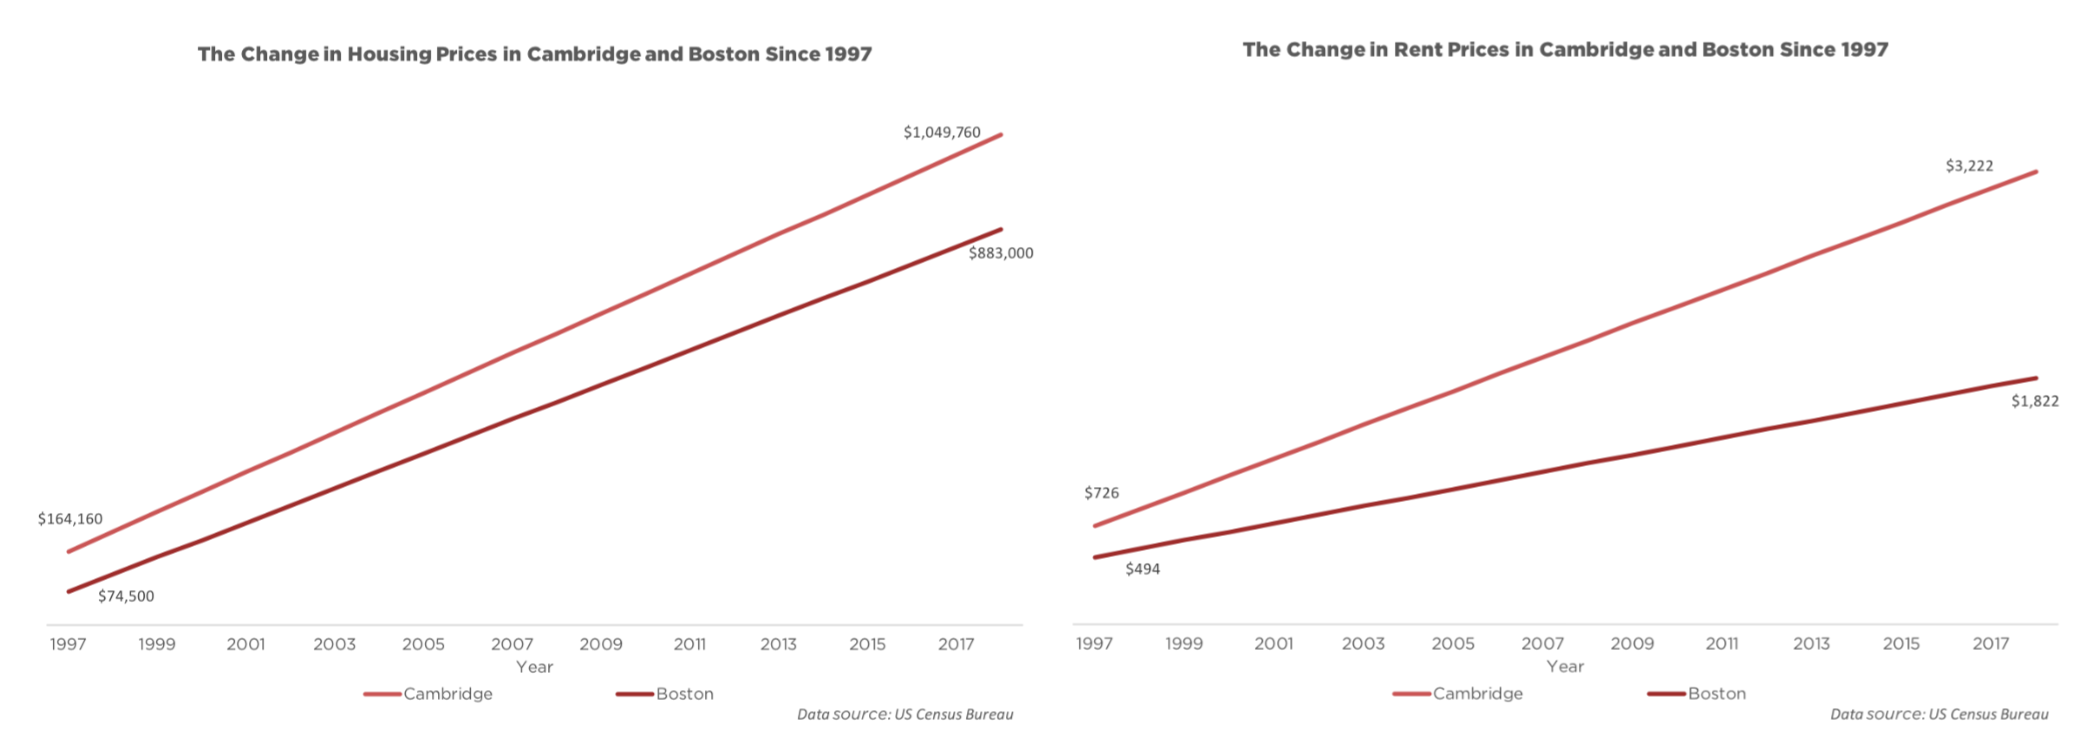 Change in housing and rent prices in Cambridge and Boston since 1997.